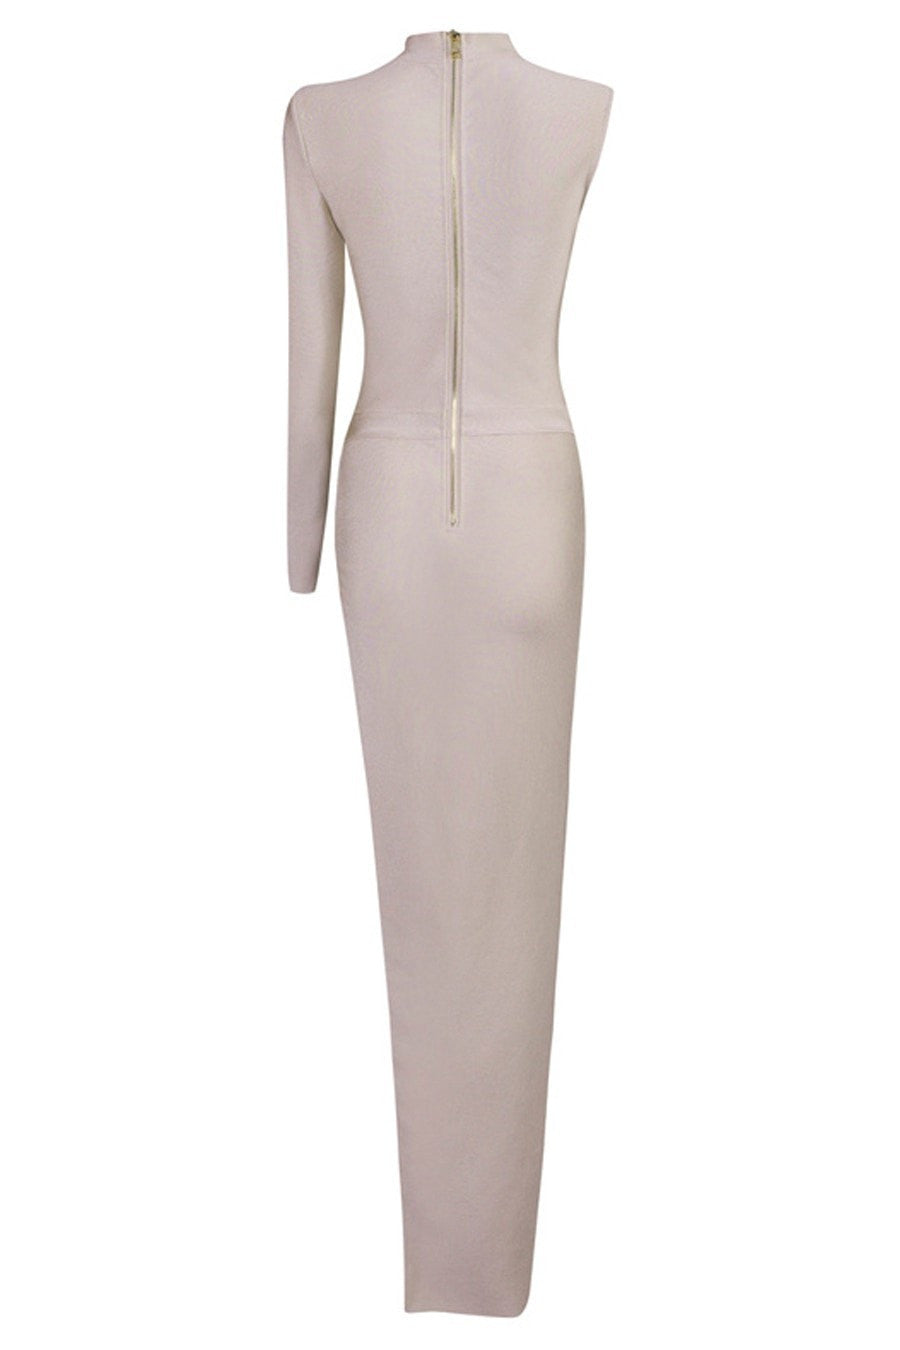 Honey Couture ROYA Taupe Silver Cut Out Bandage Maxi Dress Honey Couture$ AfterPay Humm ZipPay LayBuy Sezzle